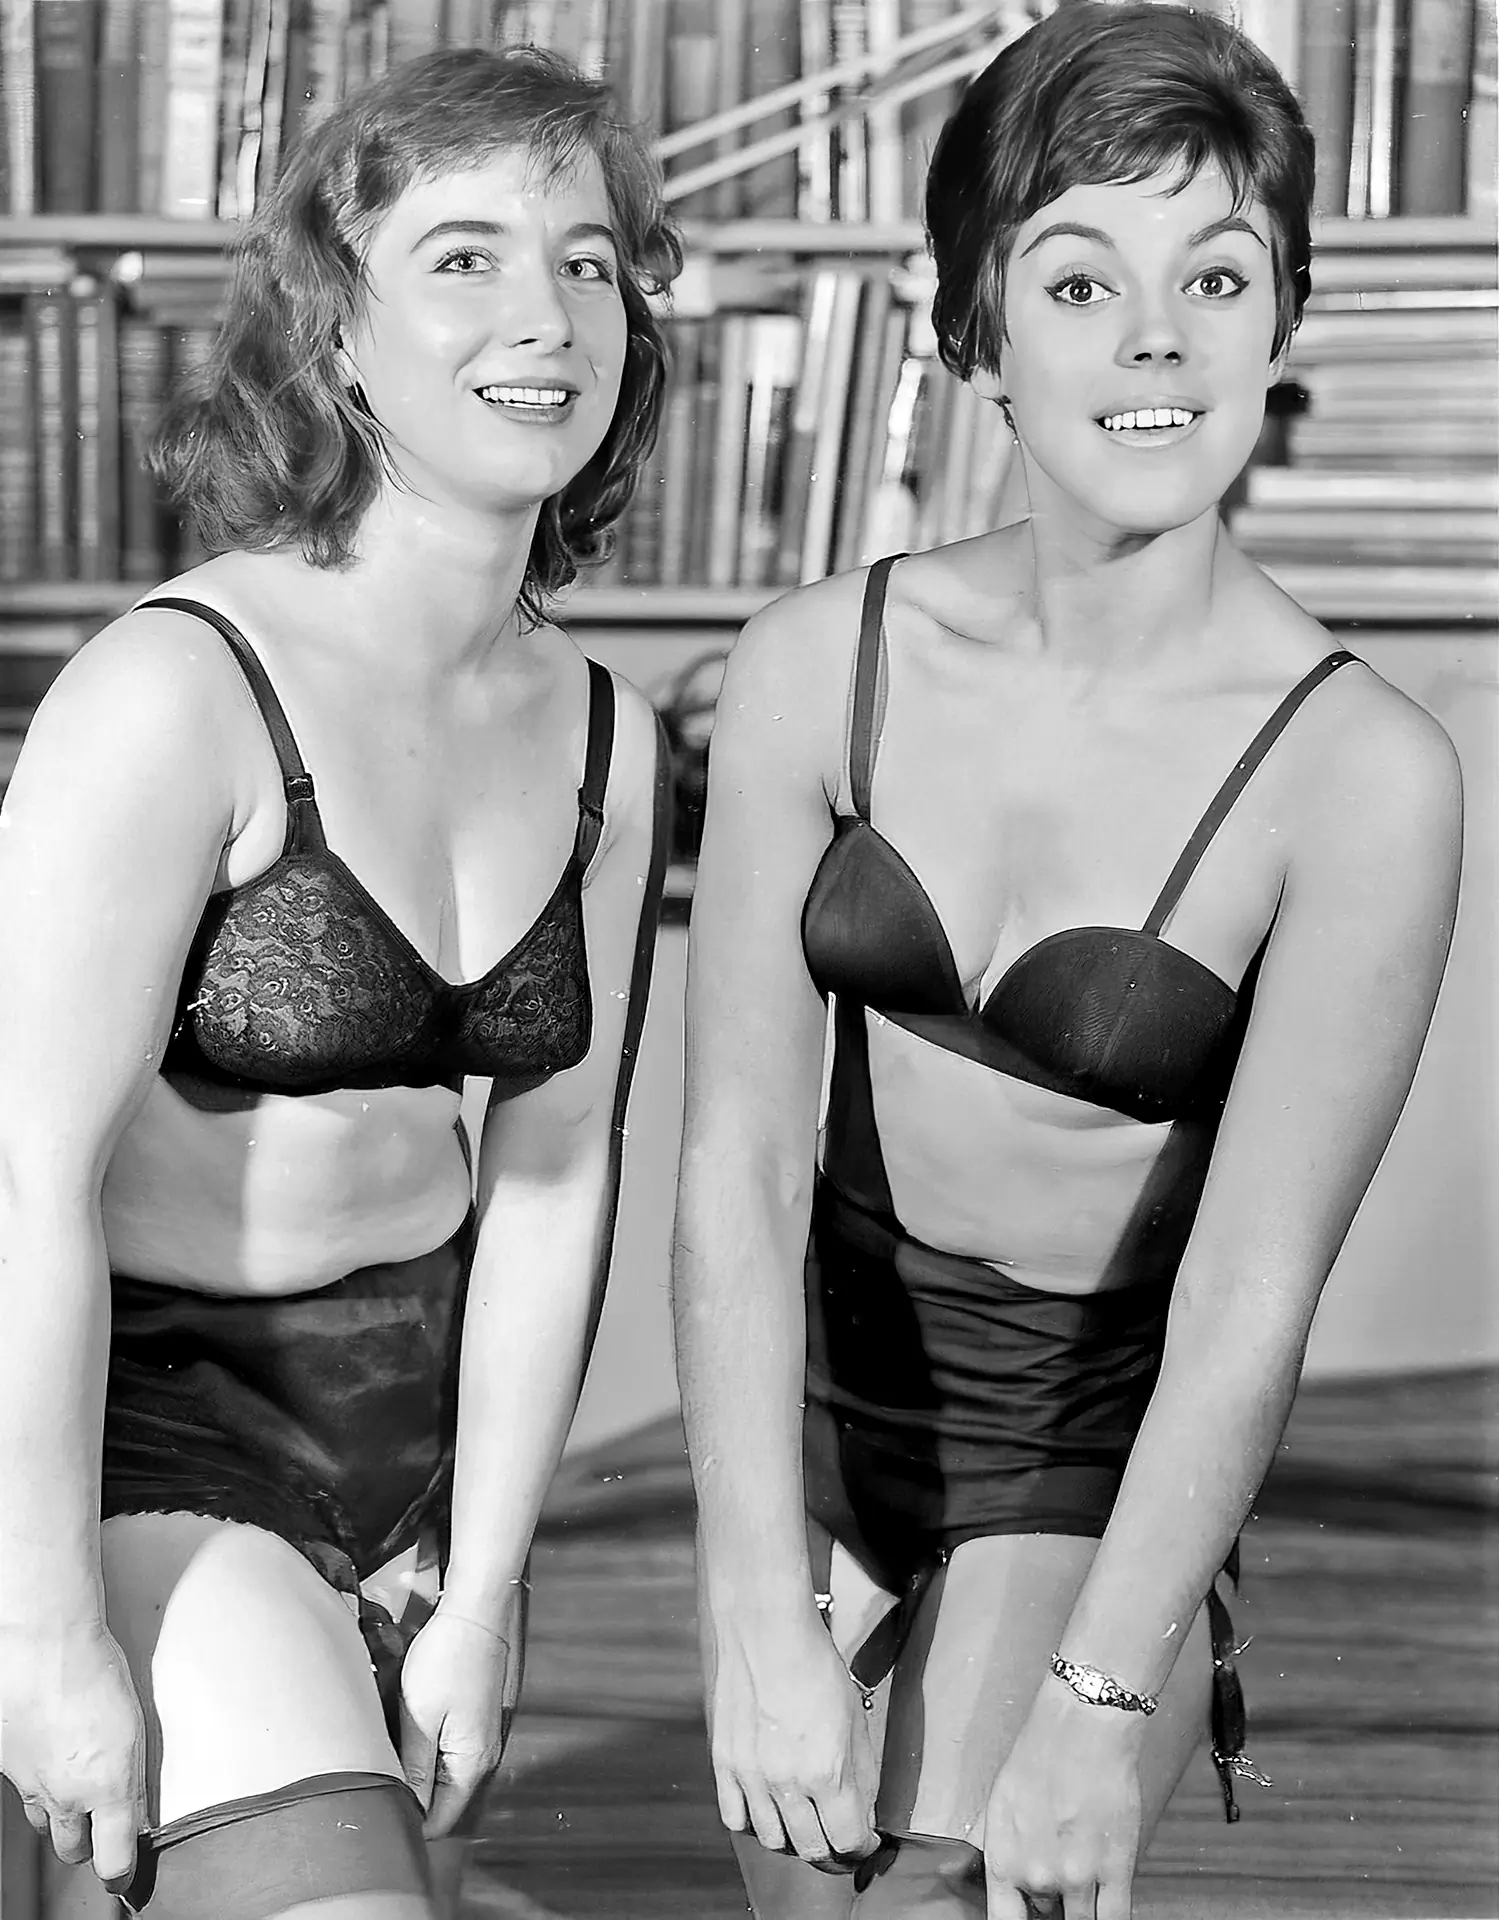 Vintage underwear porn photos with two smiling, small-breasted women wearing nothing but black bras, panties, and stocking